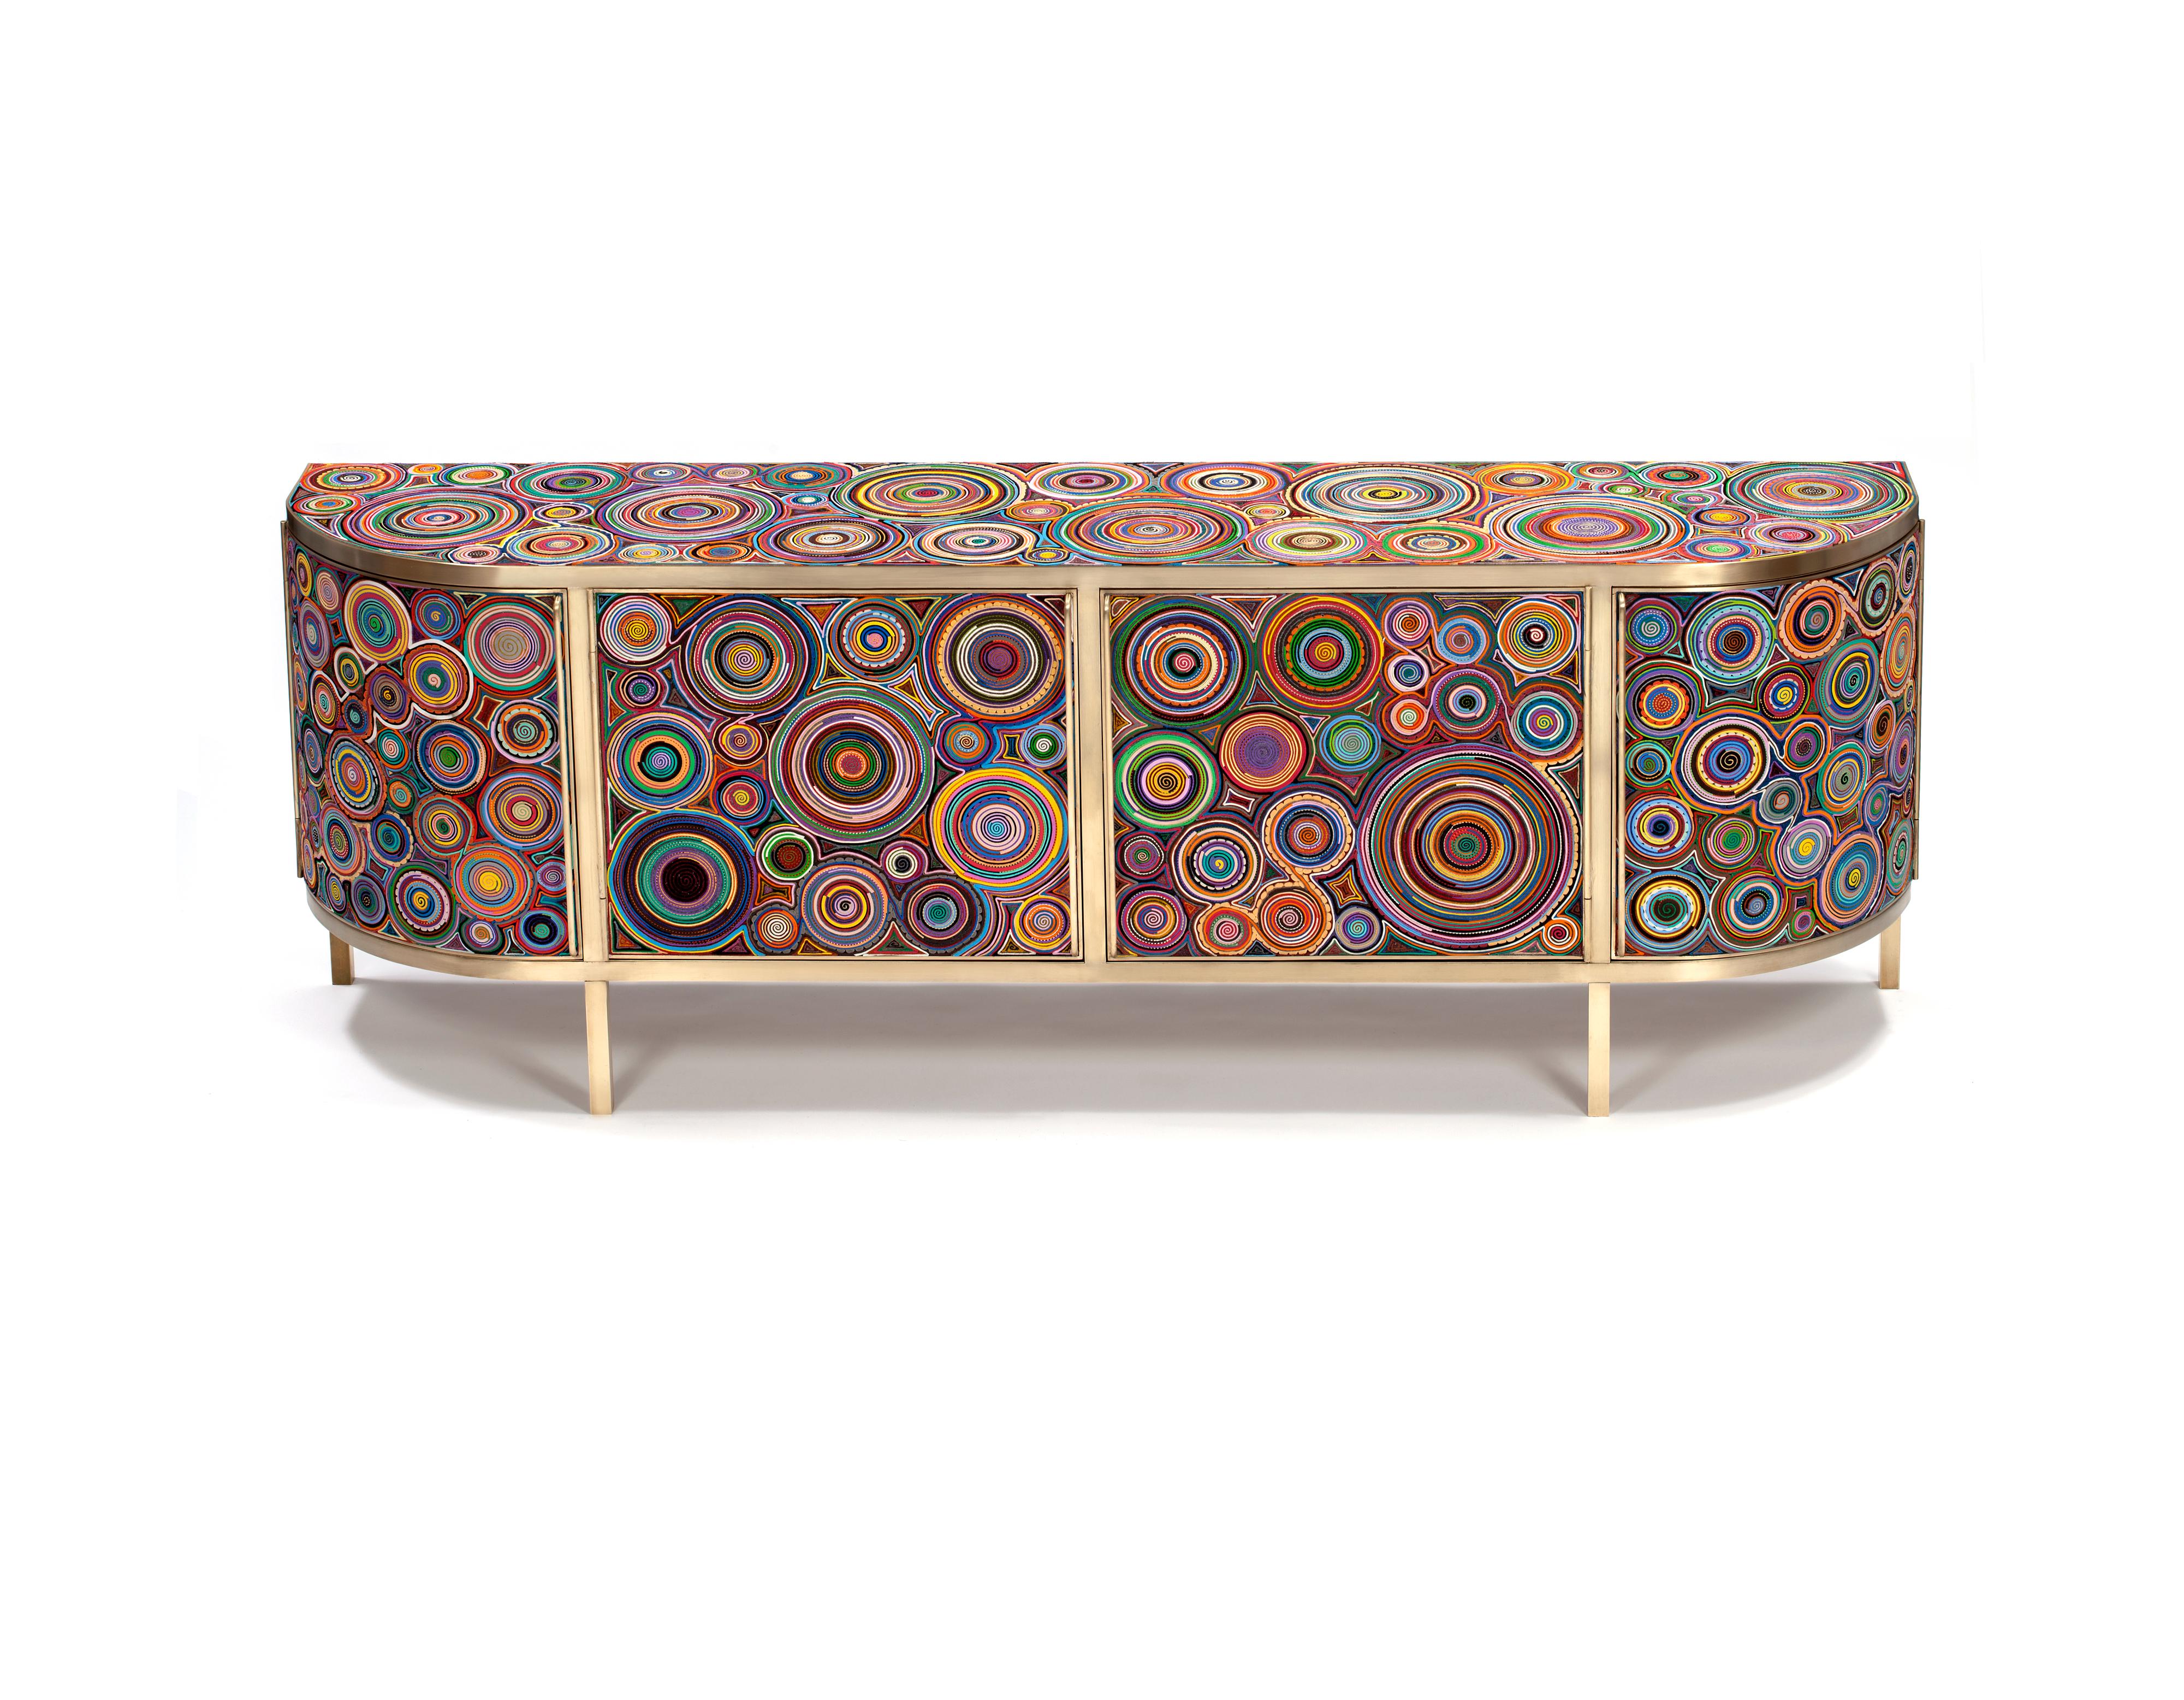 Fernando and Humberto Campana [Brazilian, b. 1961, 1953]
Sushi Buffet, 2012
Carpet, rubber, EVA, fabric and estela handcrafted into sushi rolls partially covering brass structure
28.25 x 78.75 x 17.75 inches
72 x 200 x 45 cm